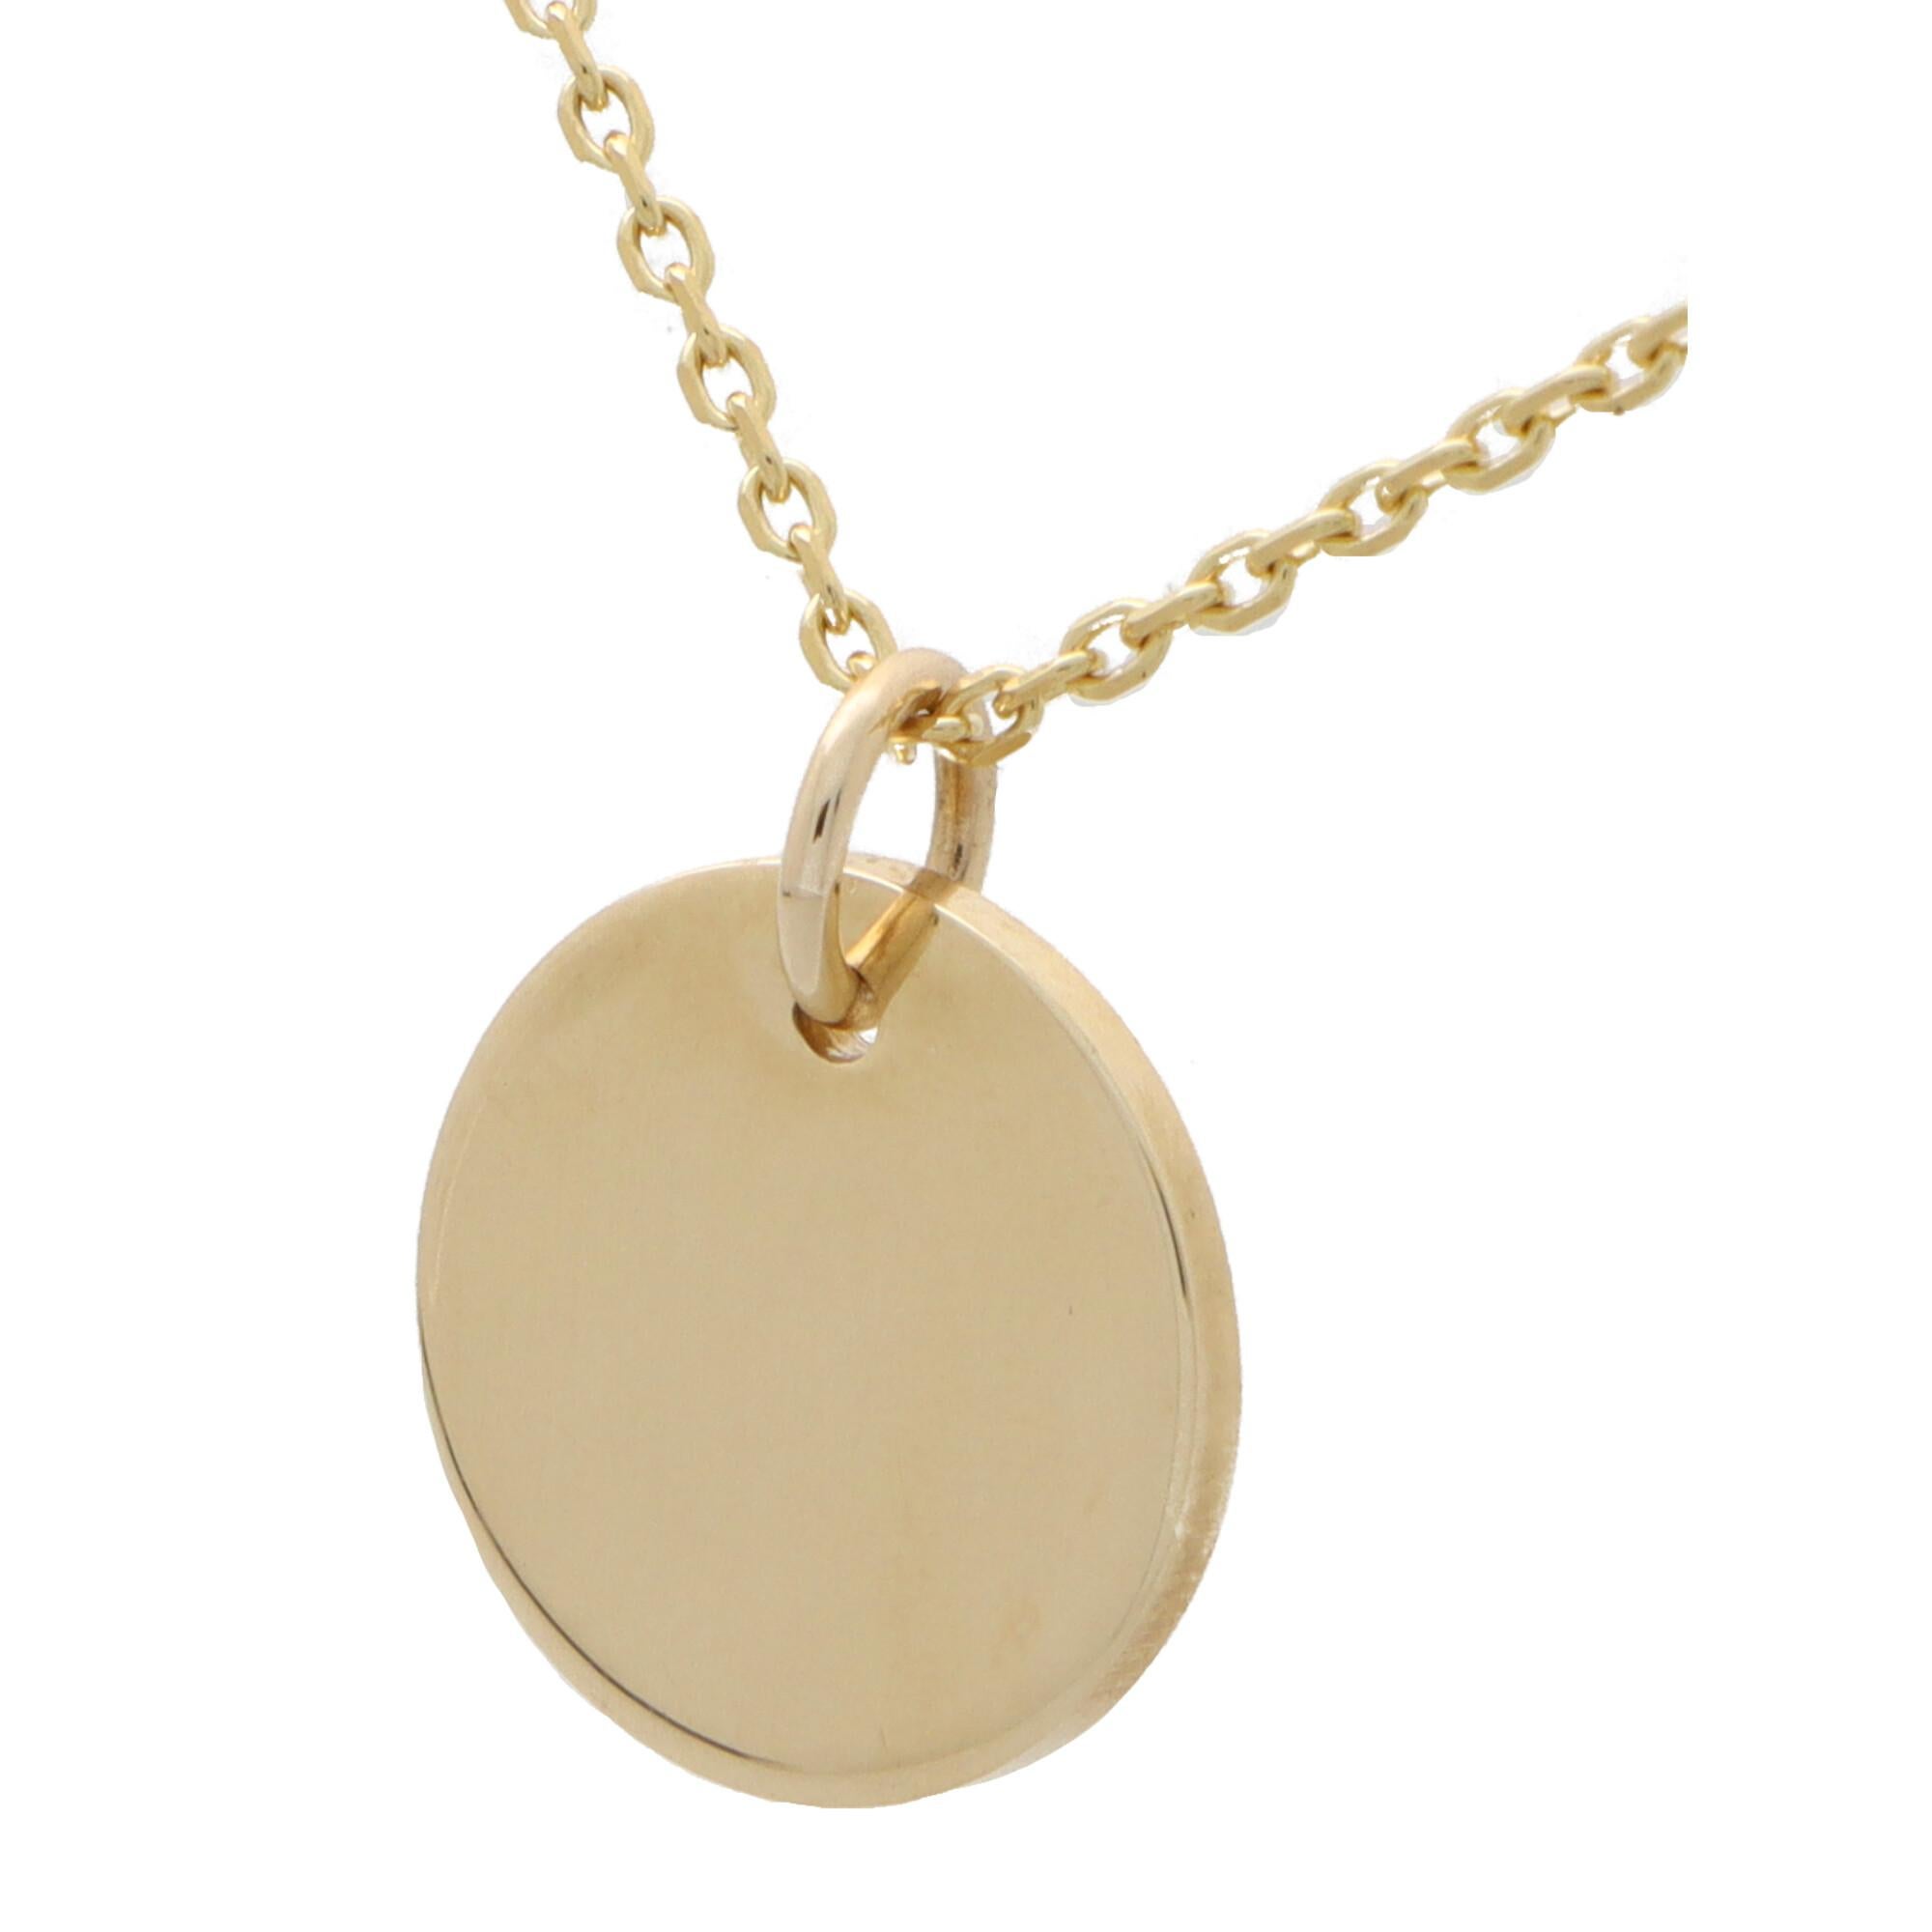 Modern Solid 9k Yellow Gold Circular Disc Pendant / Cham For Sale